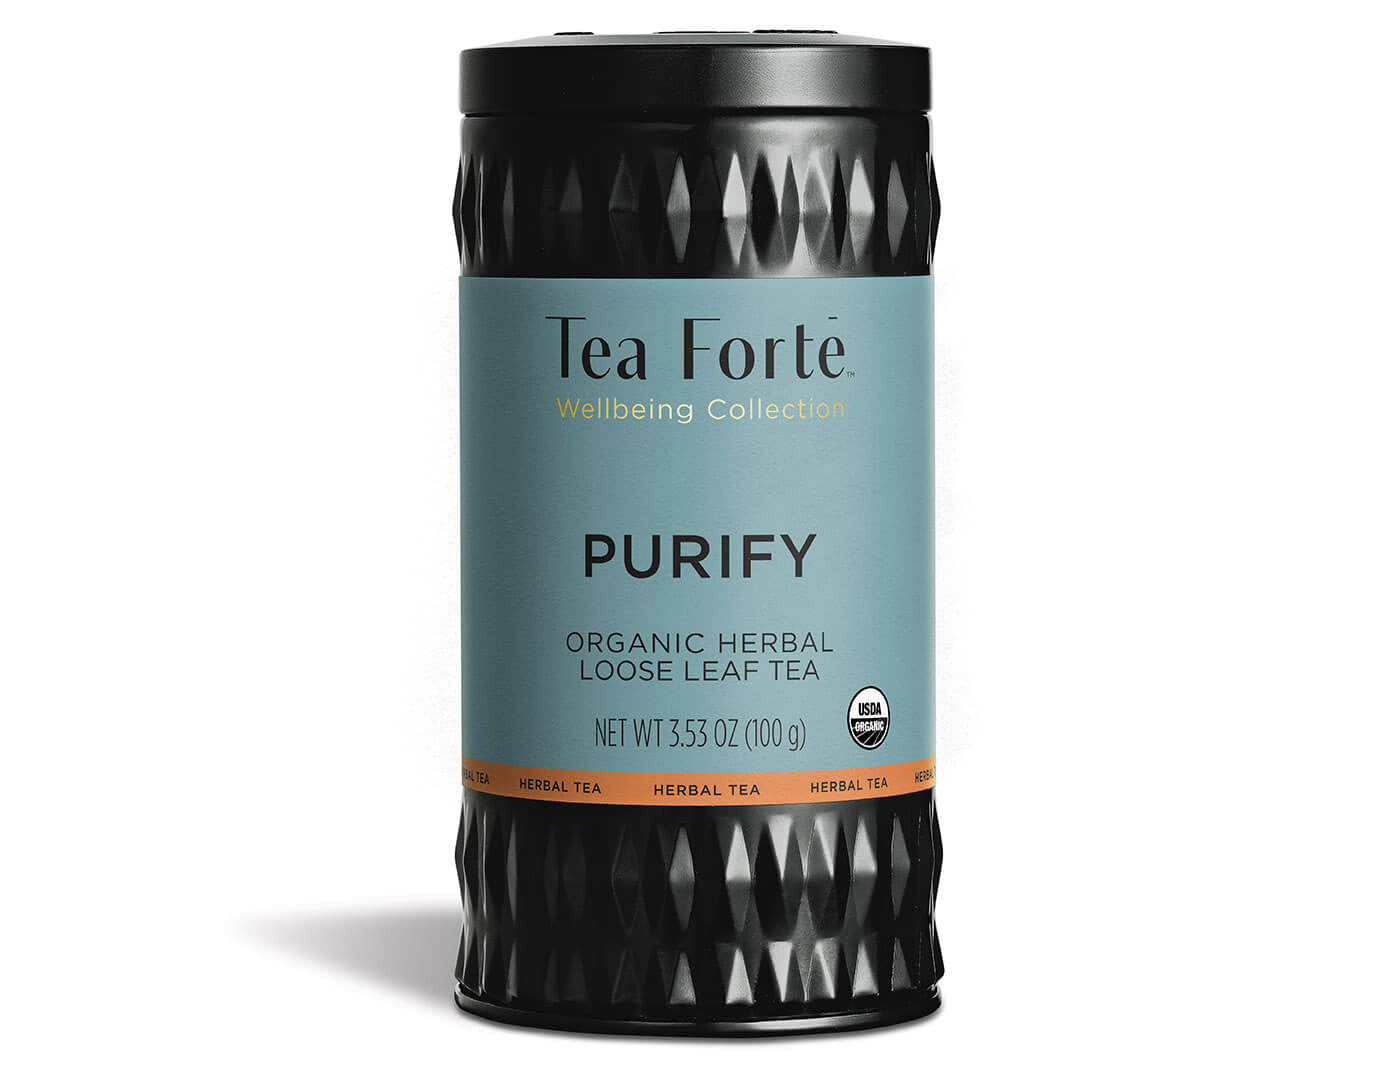 Purify tea in a canister of loose tea